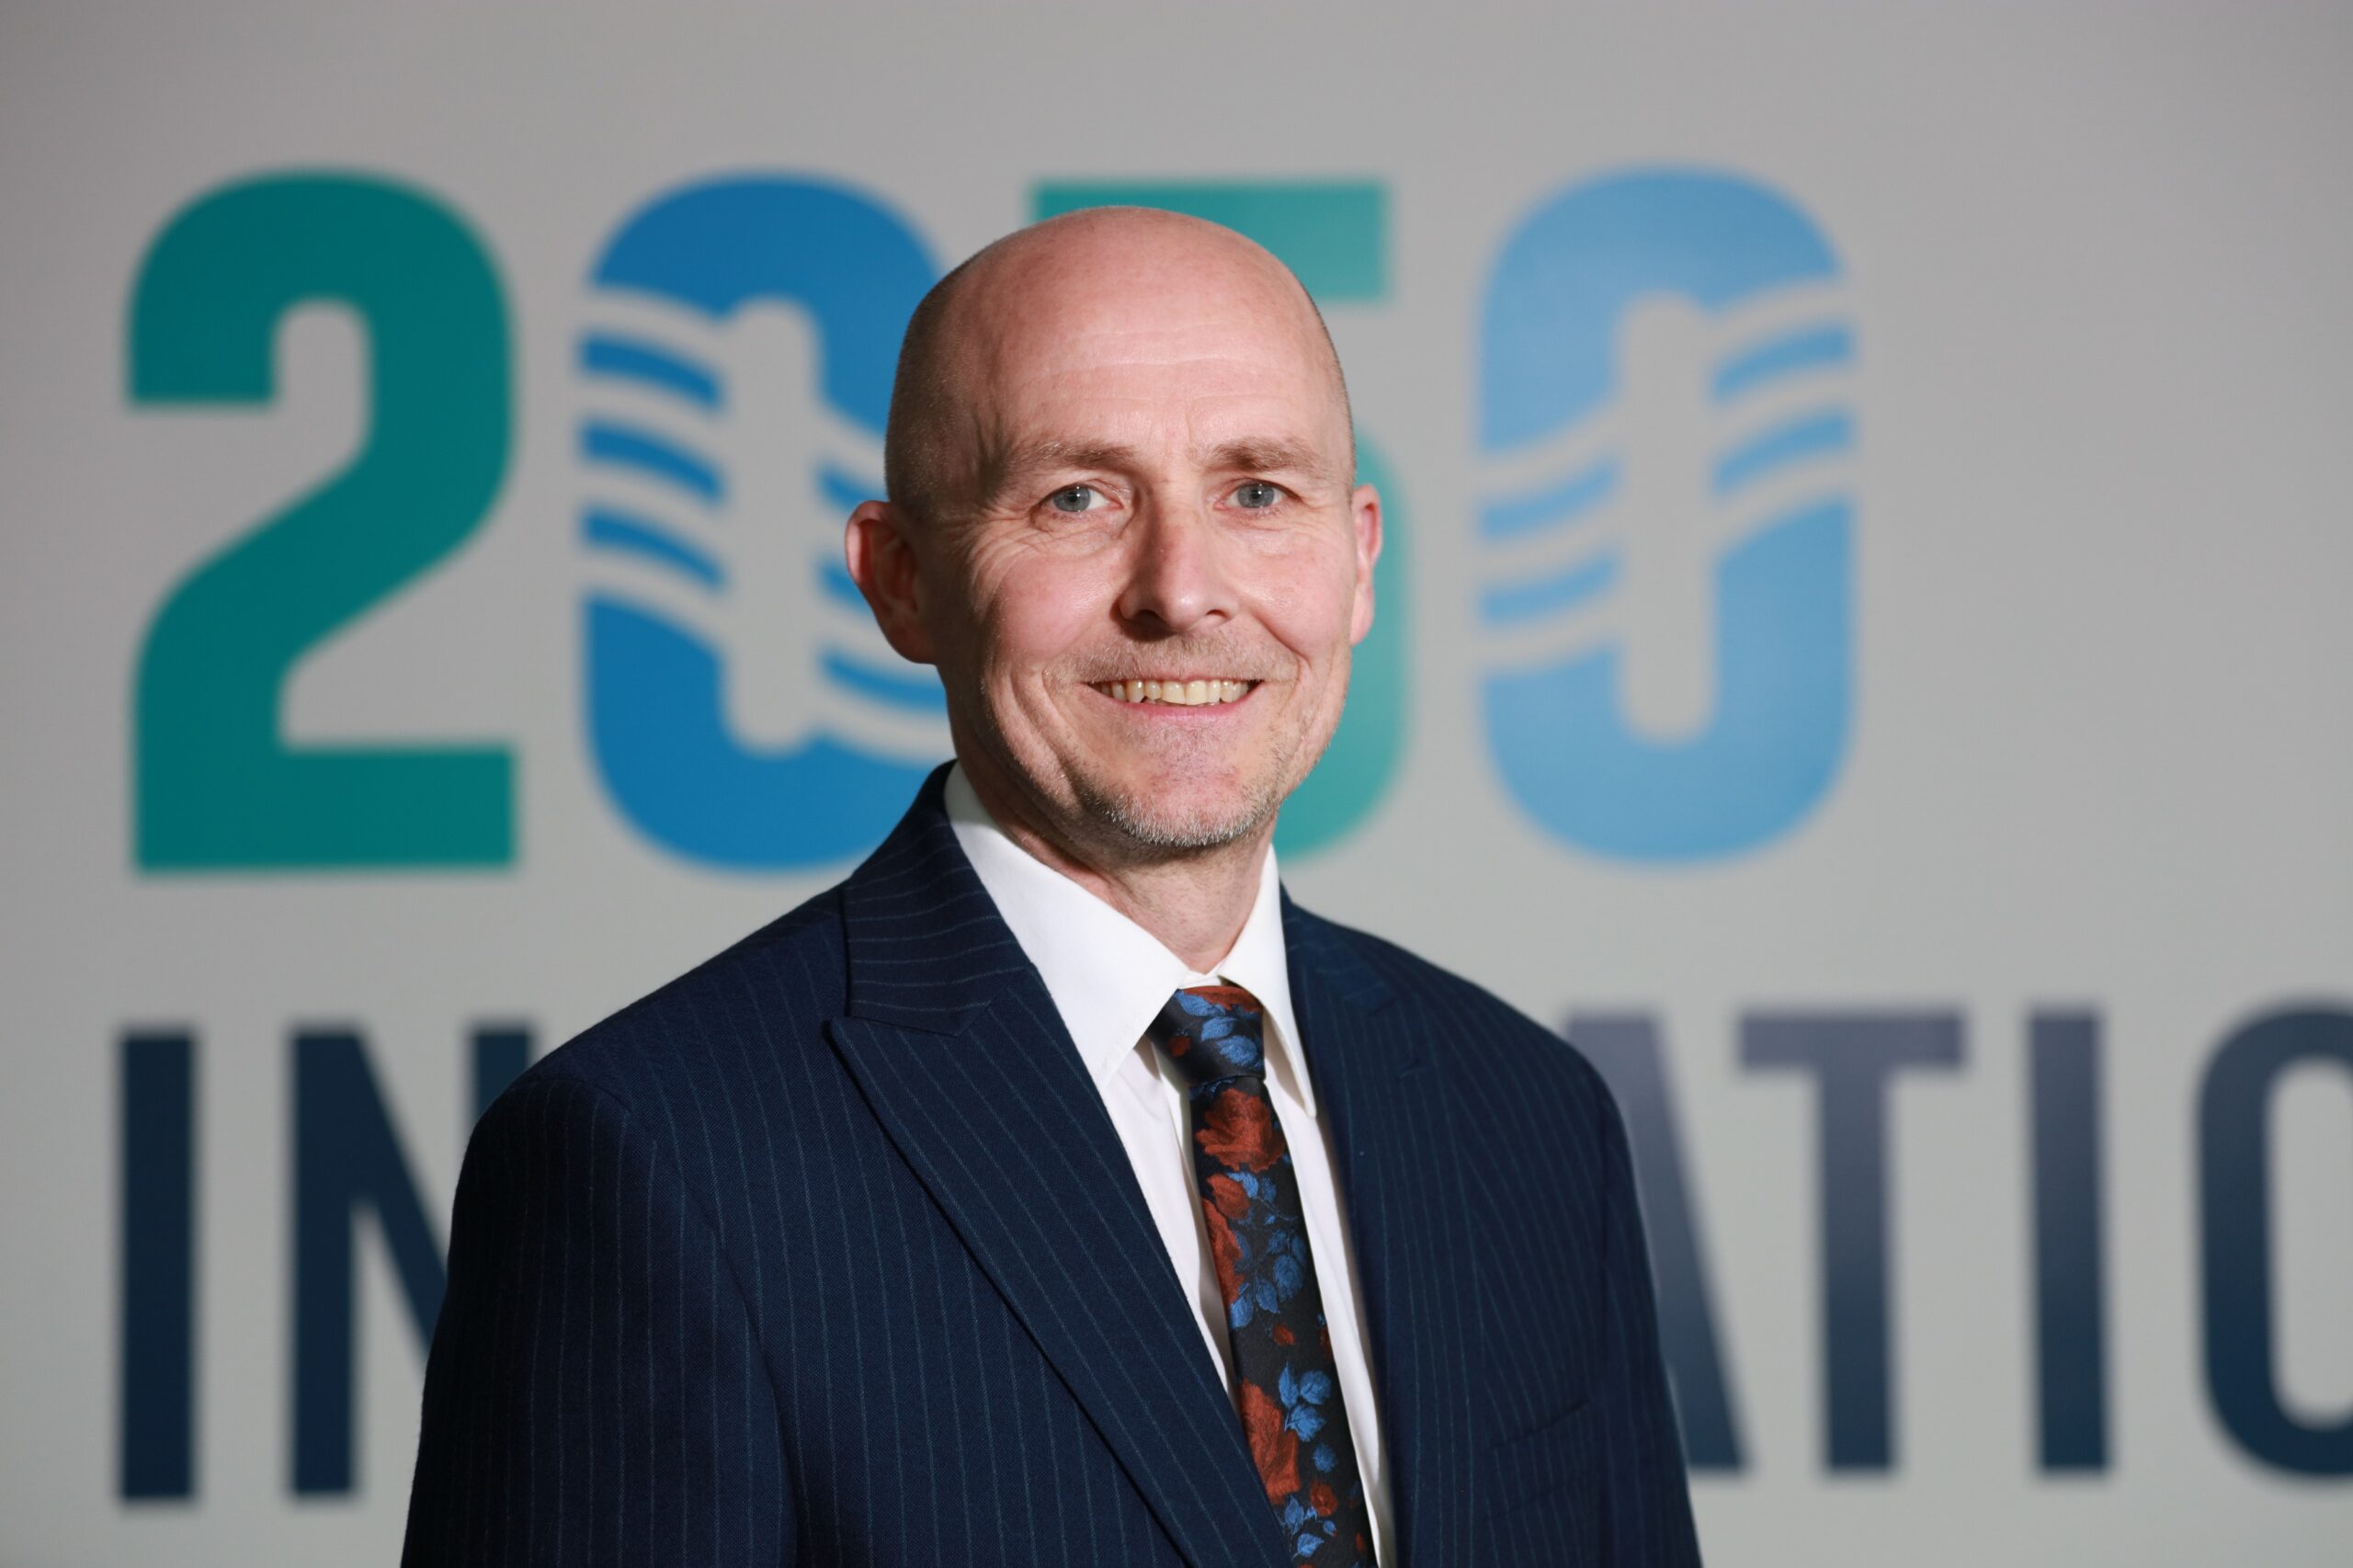 Port of Tyne Appoints New Commercial Director